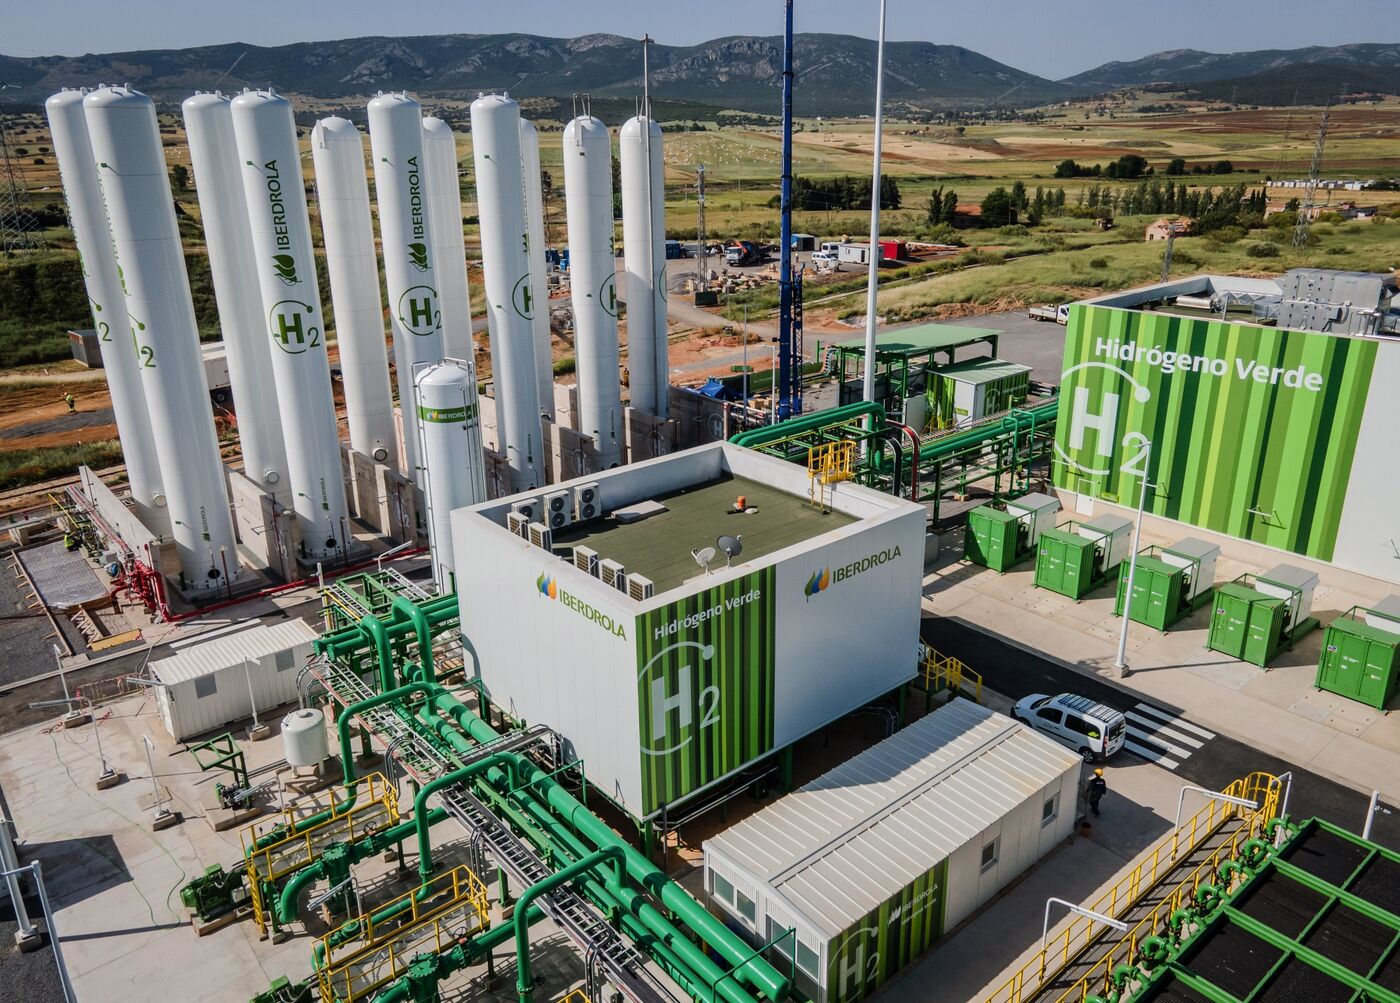 Europe's Largest Green Hydrogen Plant